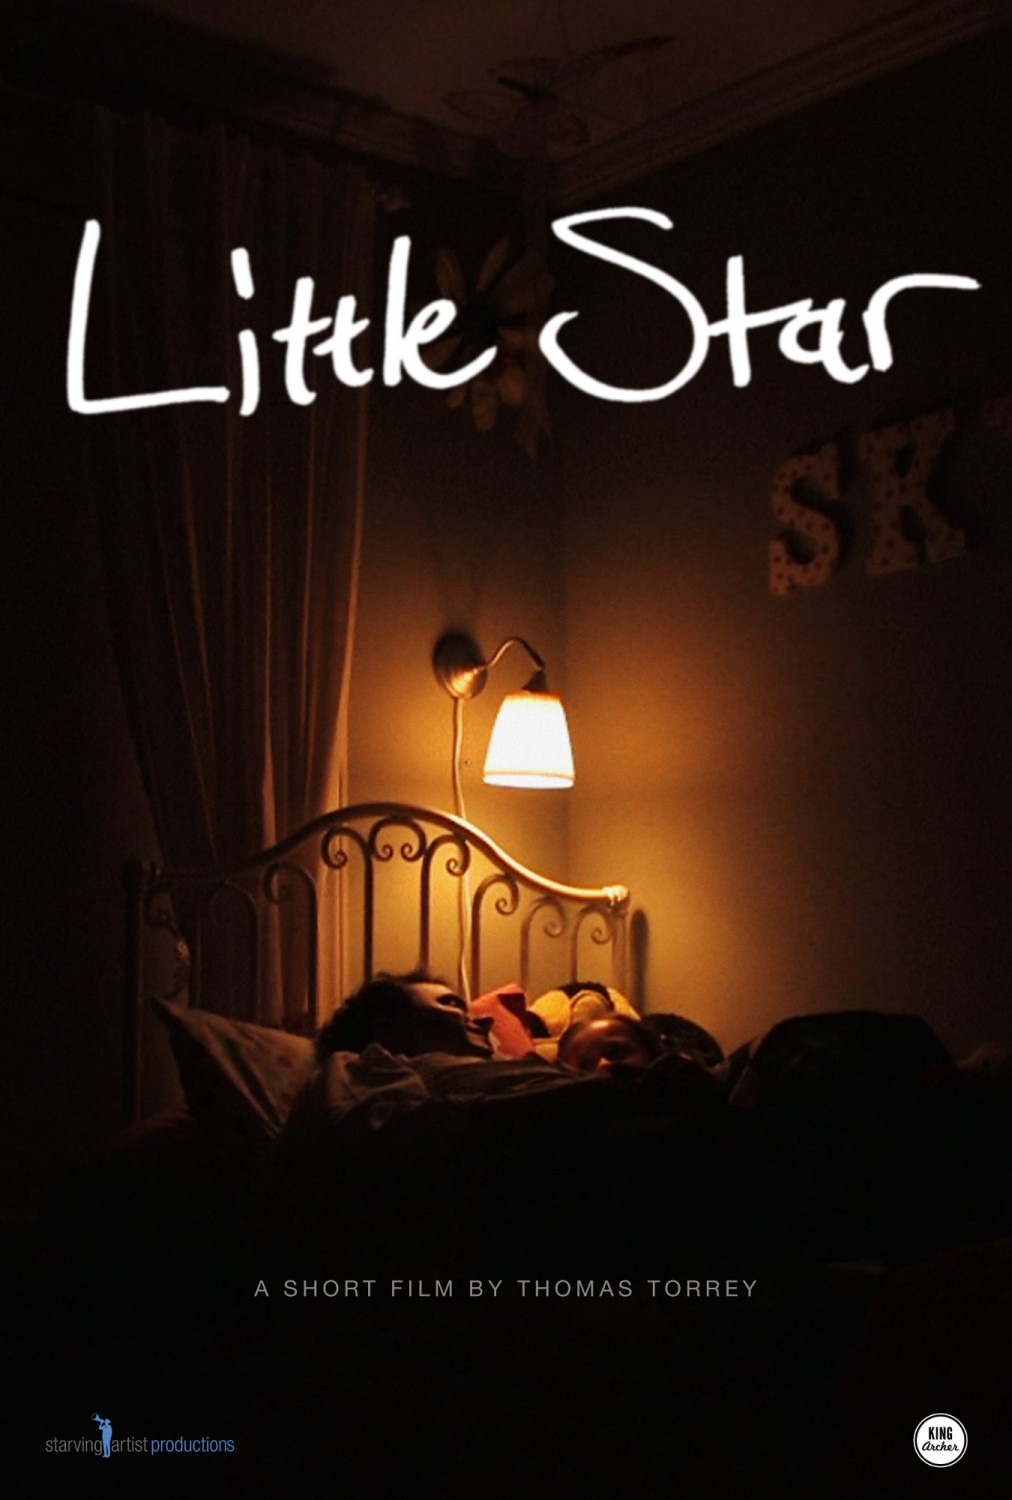 Extra Large Movie Poster Image for Little Star